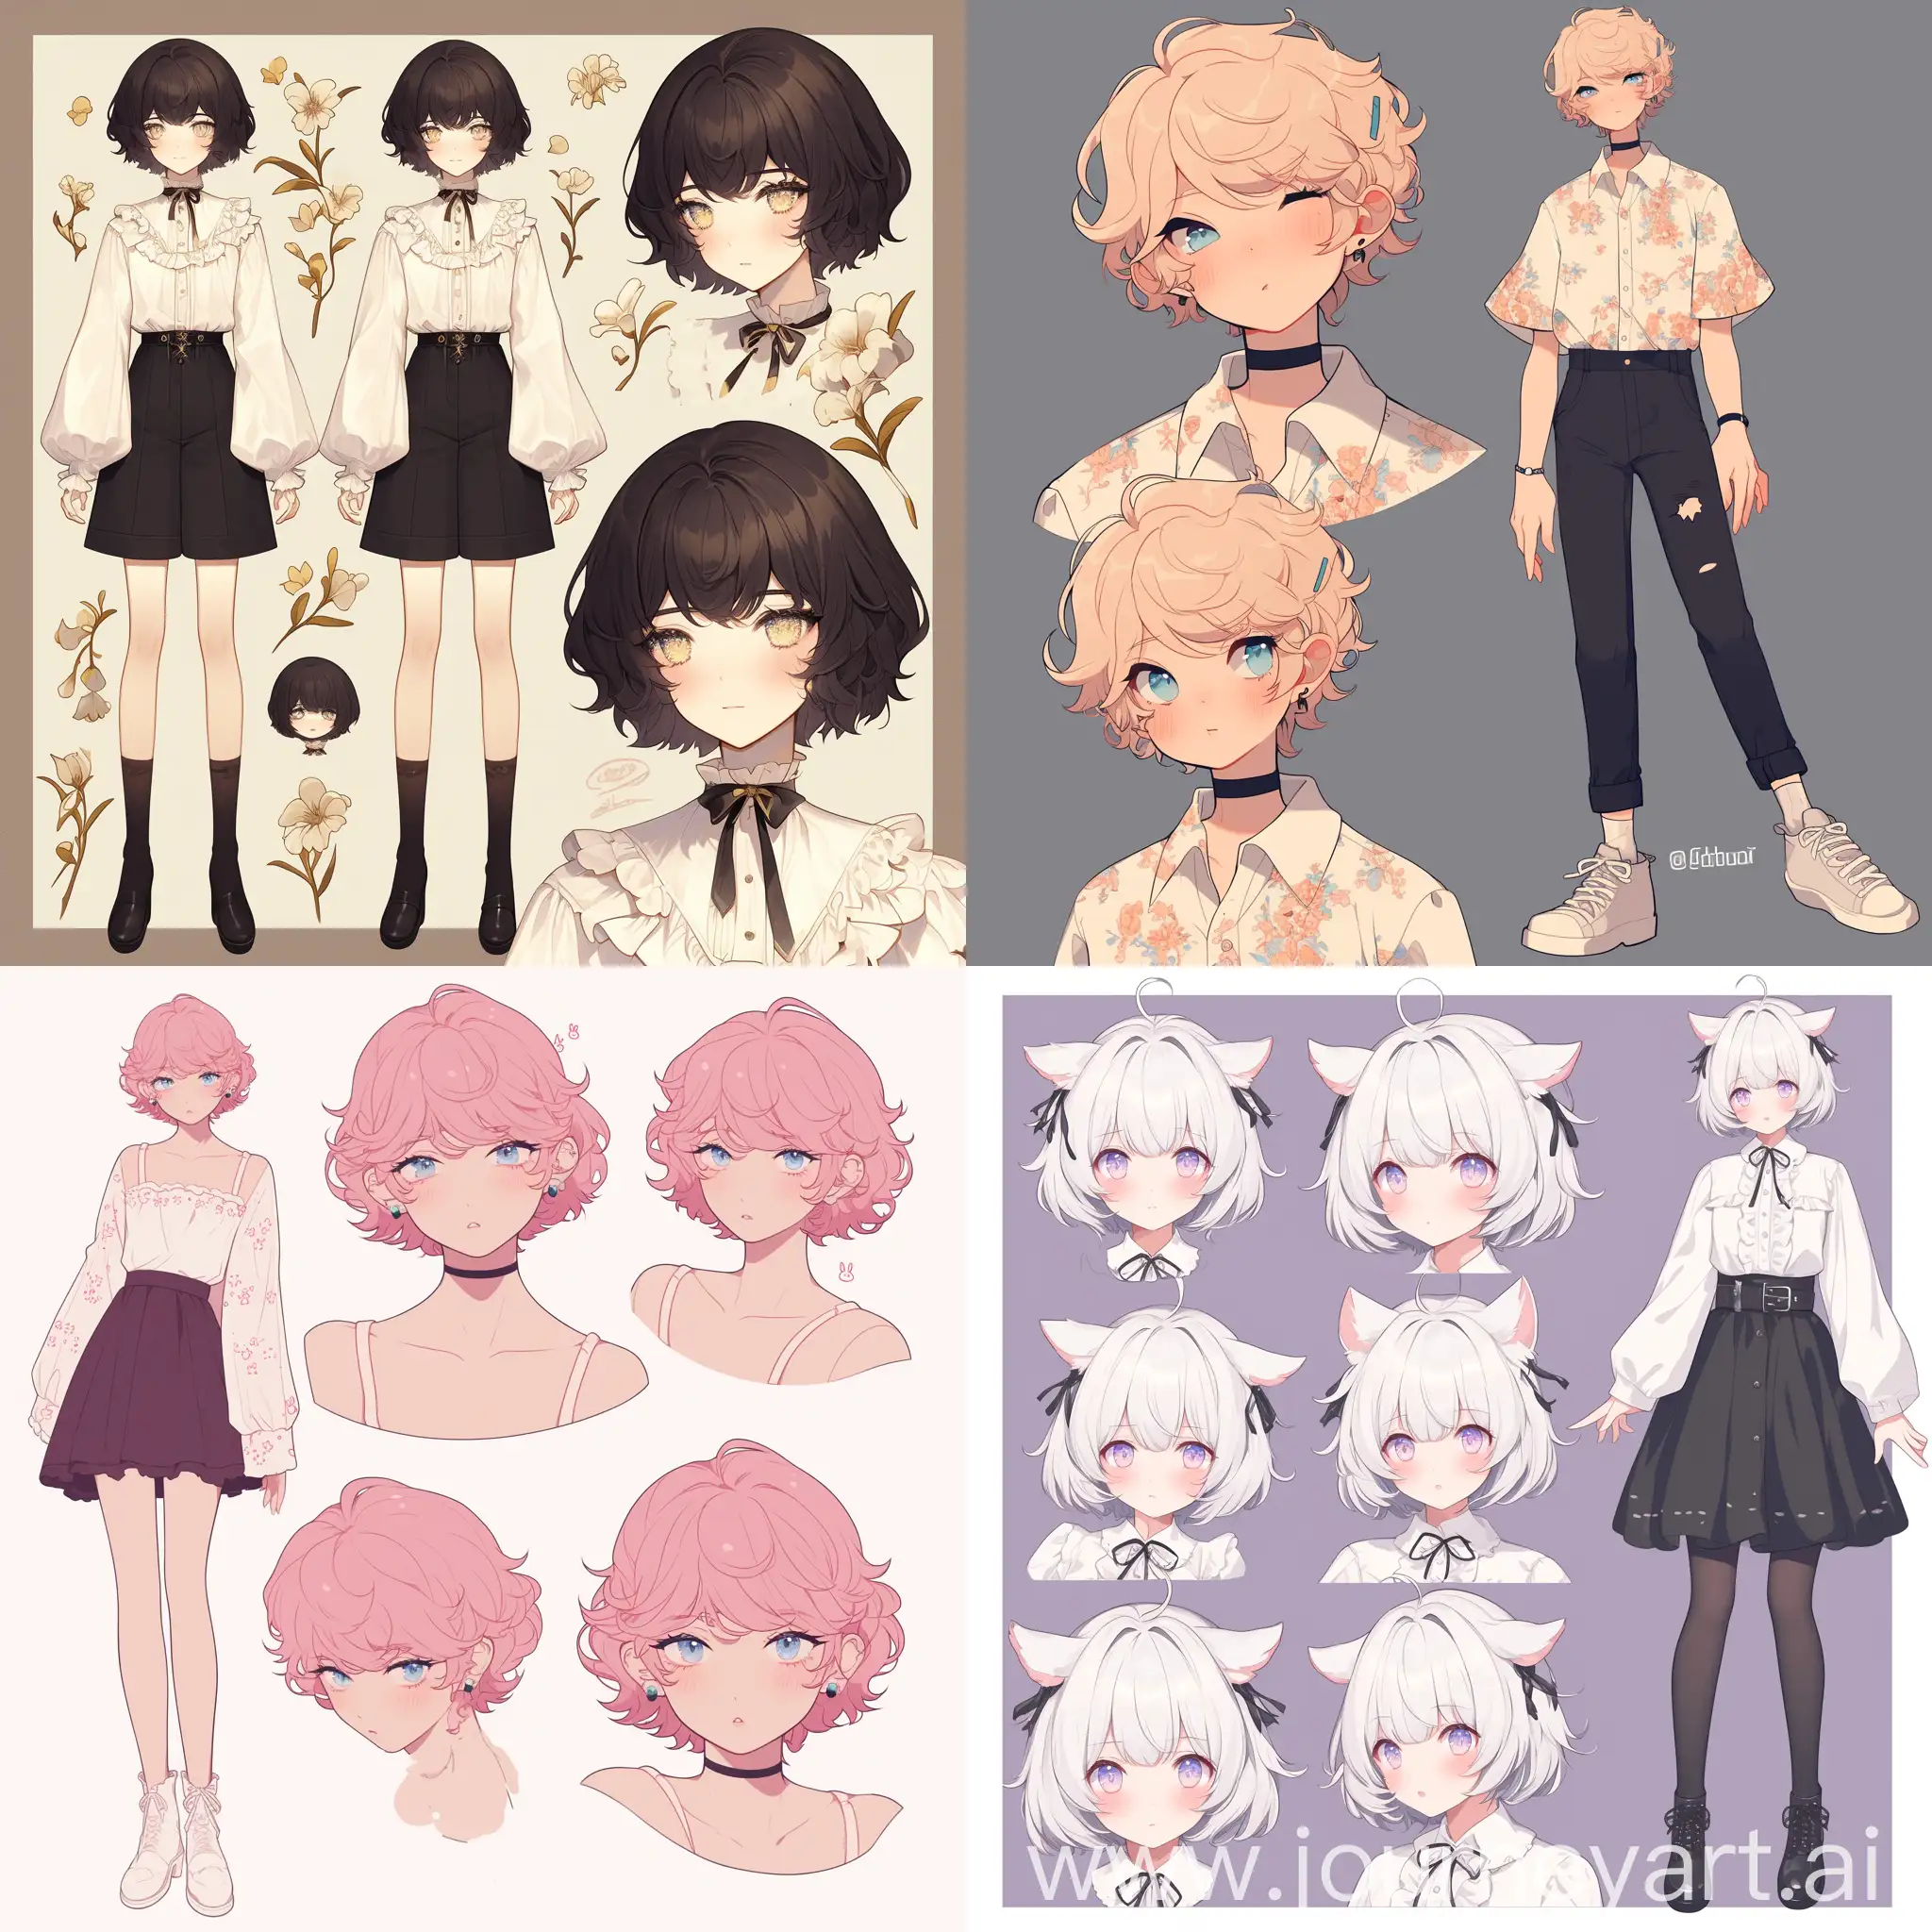 Charming-Reference-Sheet-for-Niji-Character-with-Cute-Feminine-Boy-Aesthetics